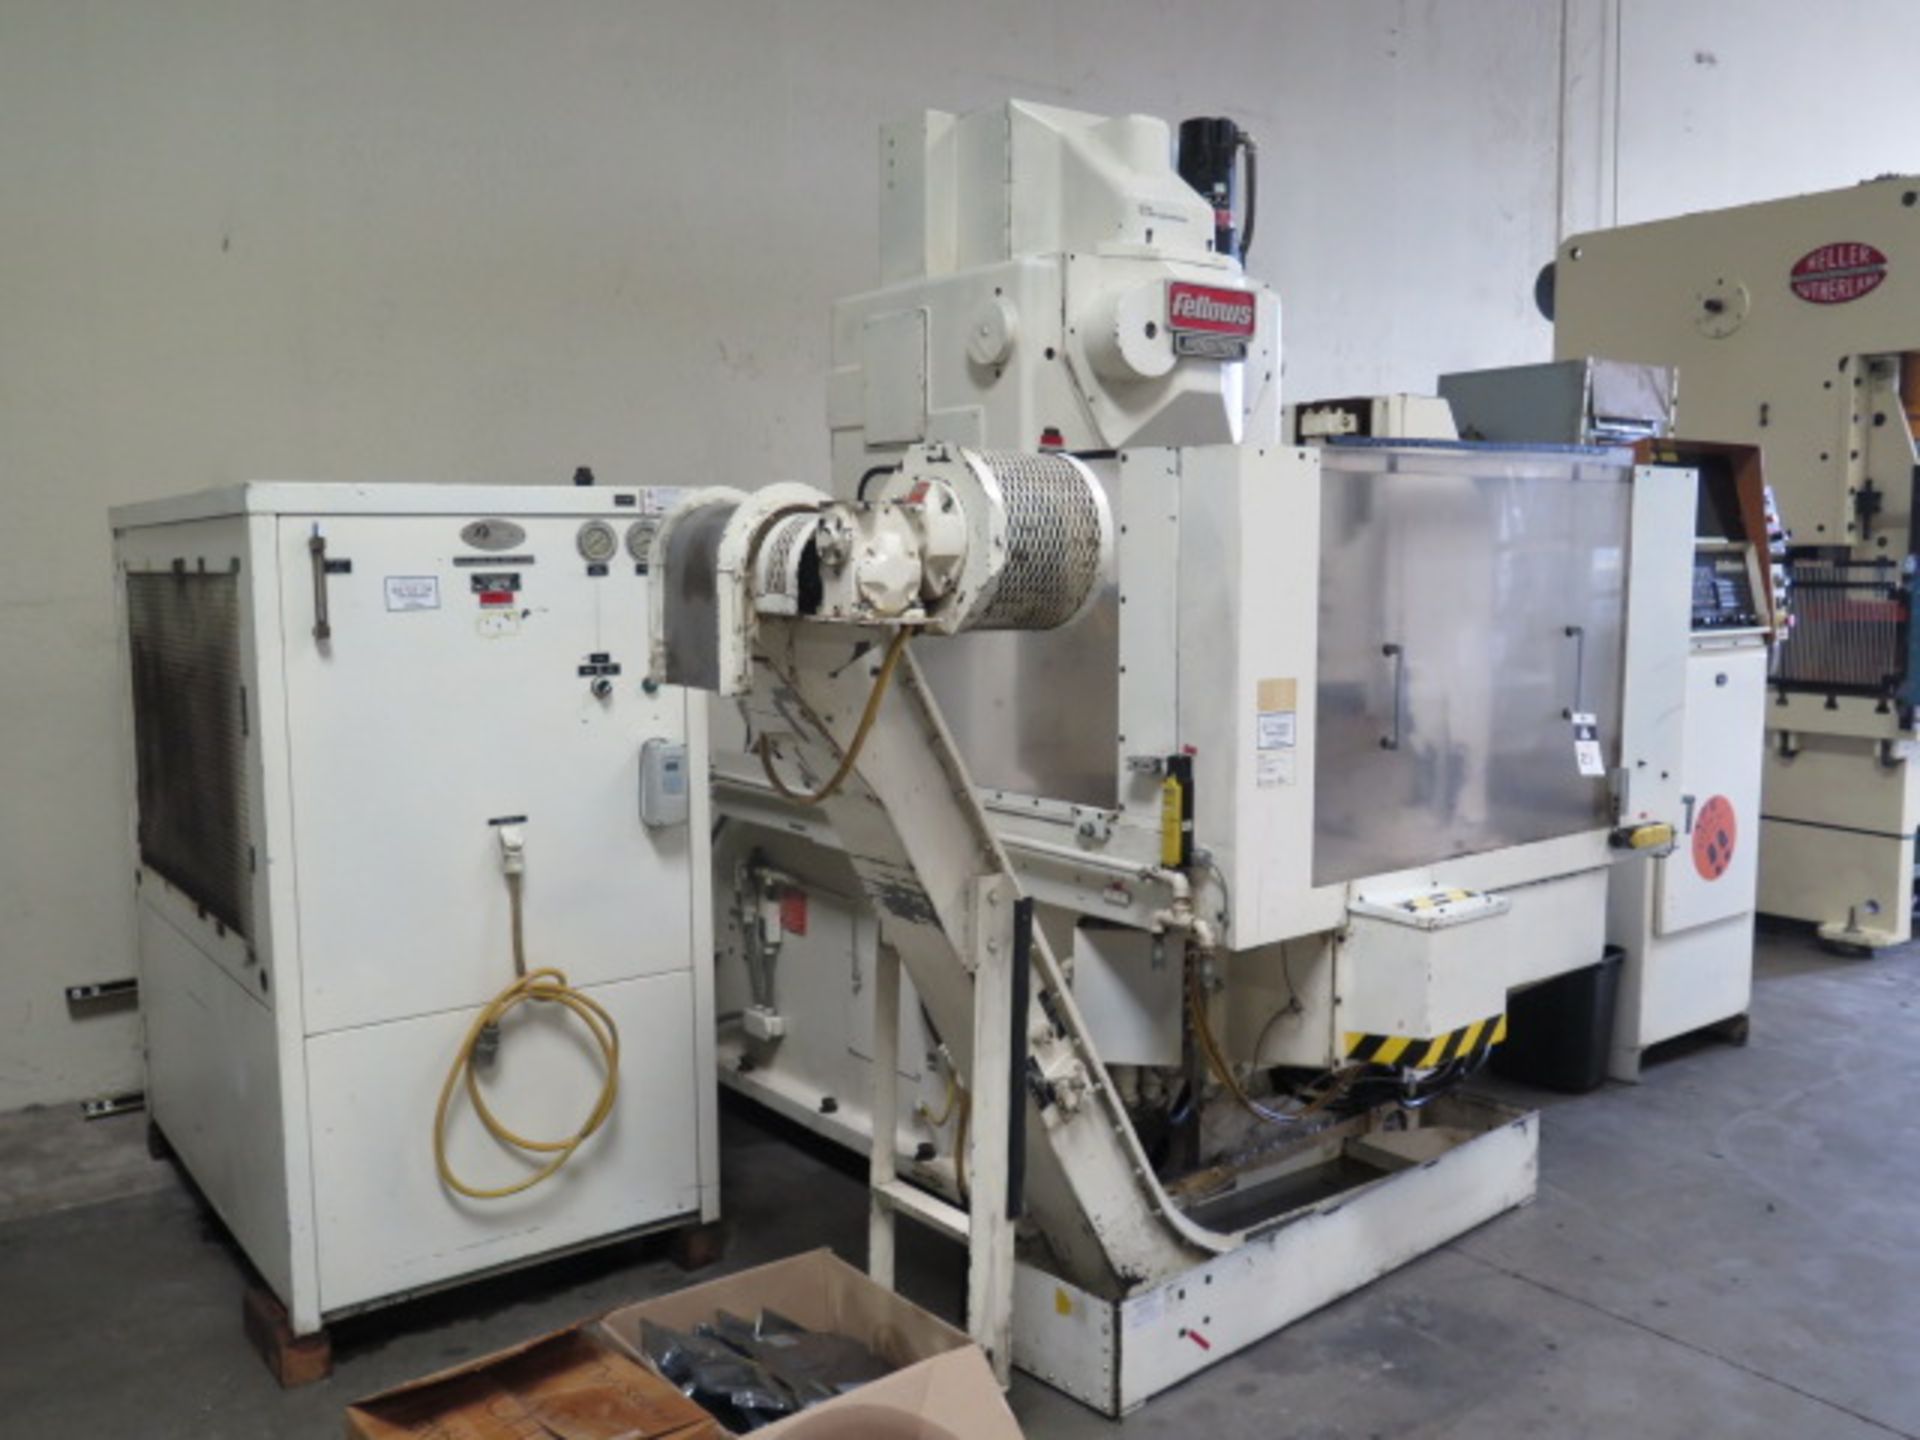 Fellows “Hydrostroke” CNC Gear Shaper w/ Fellows CNC Controls, Hydr Unit, Cooling Unit, SOLD AS IS - Image 2 of 12